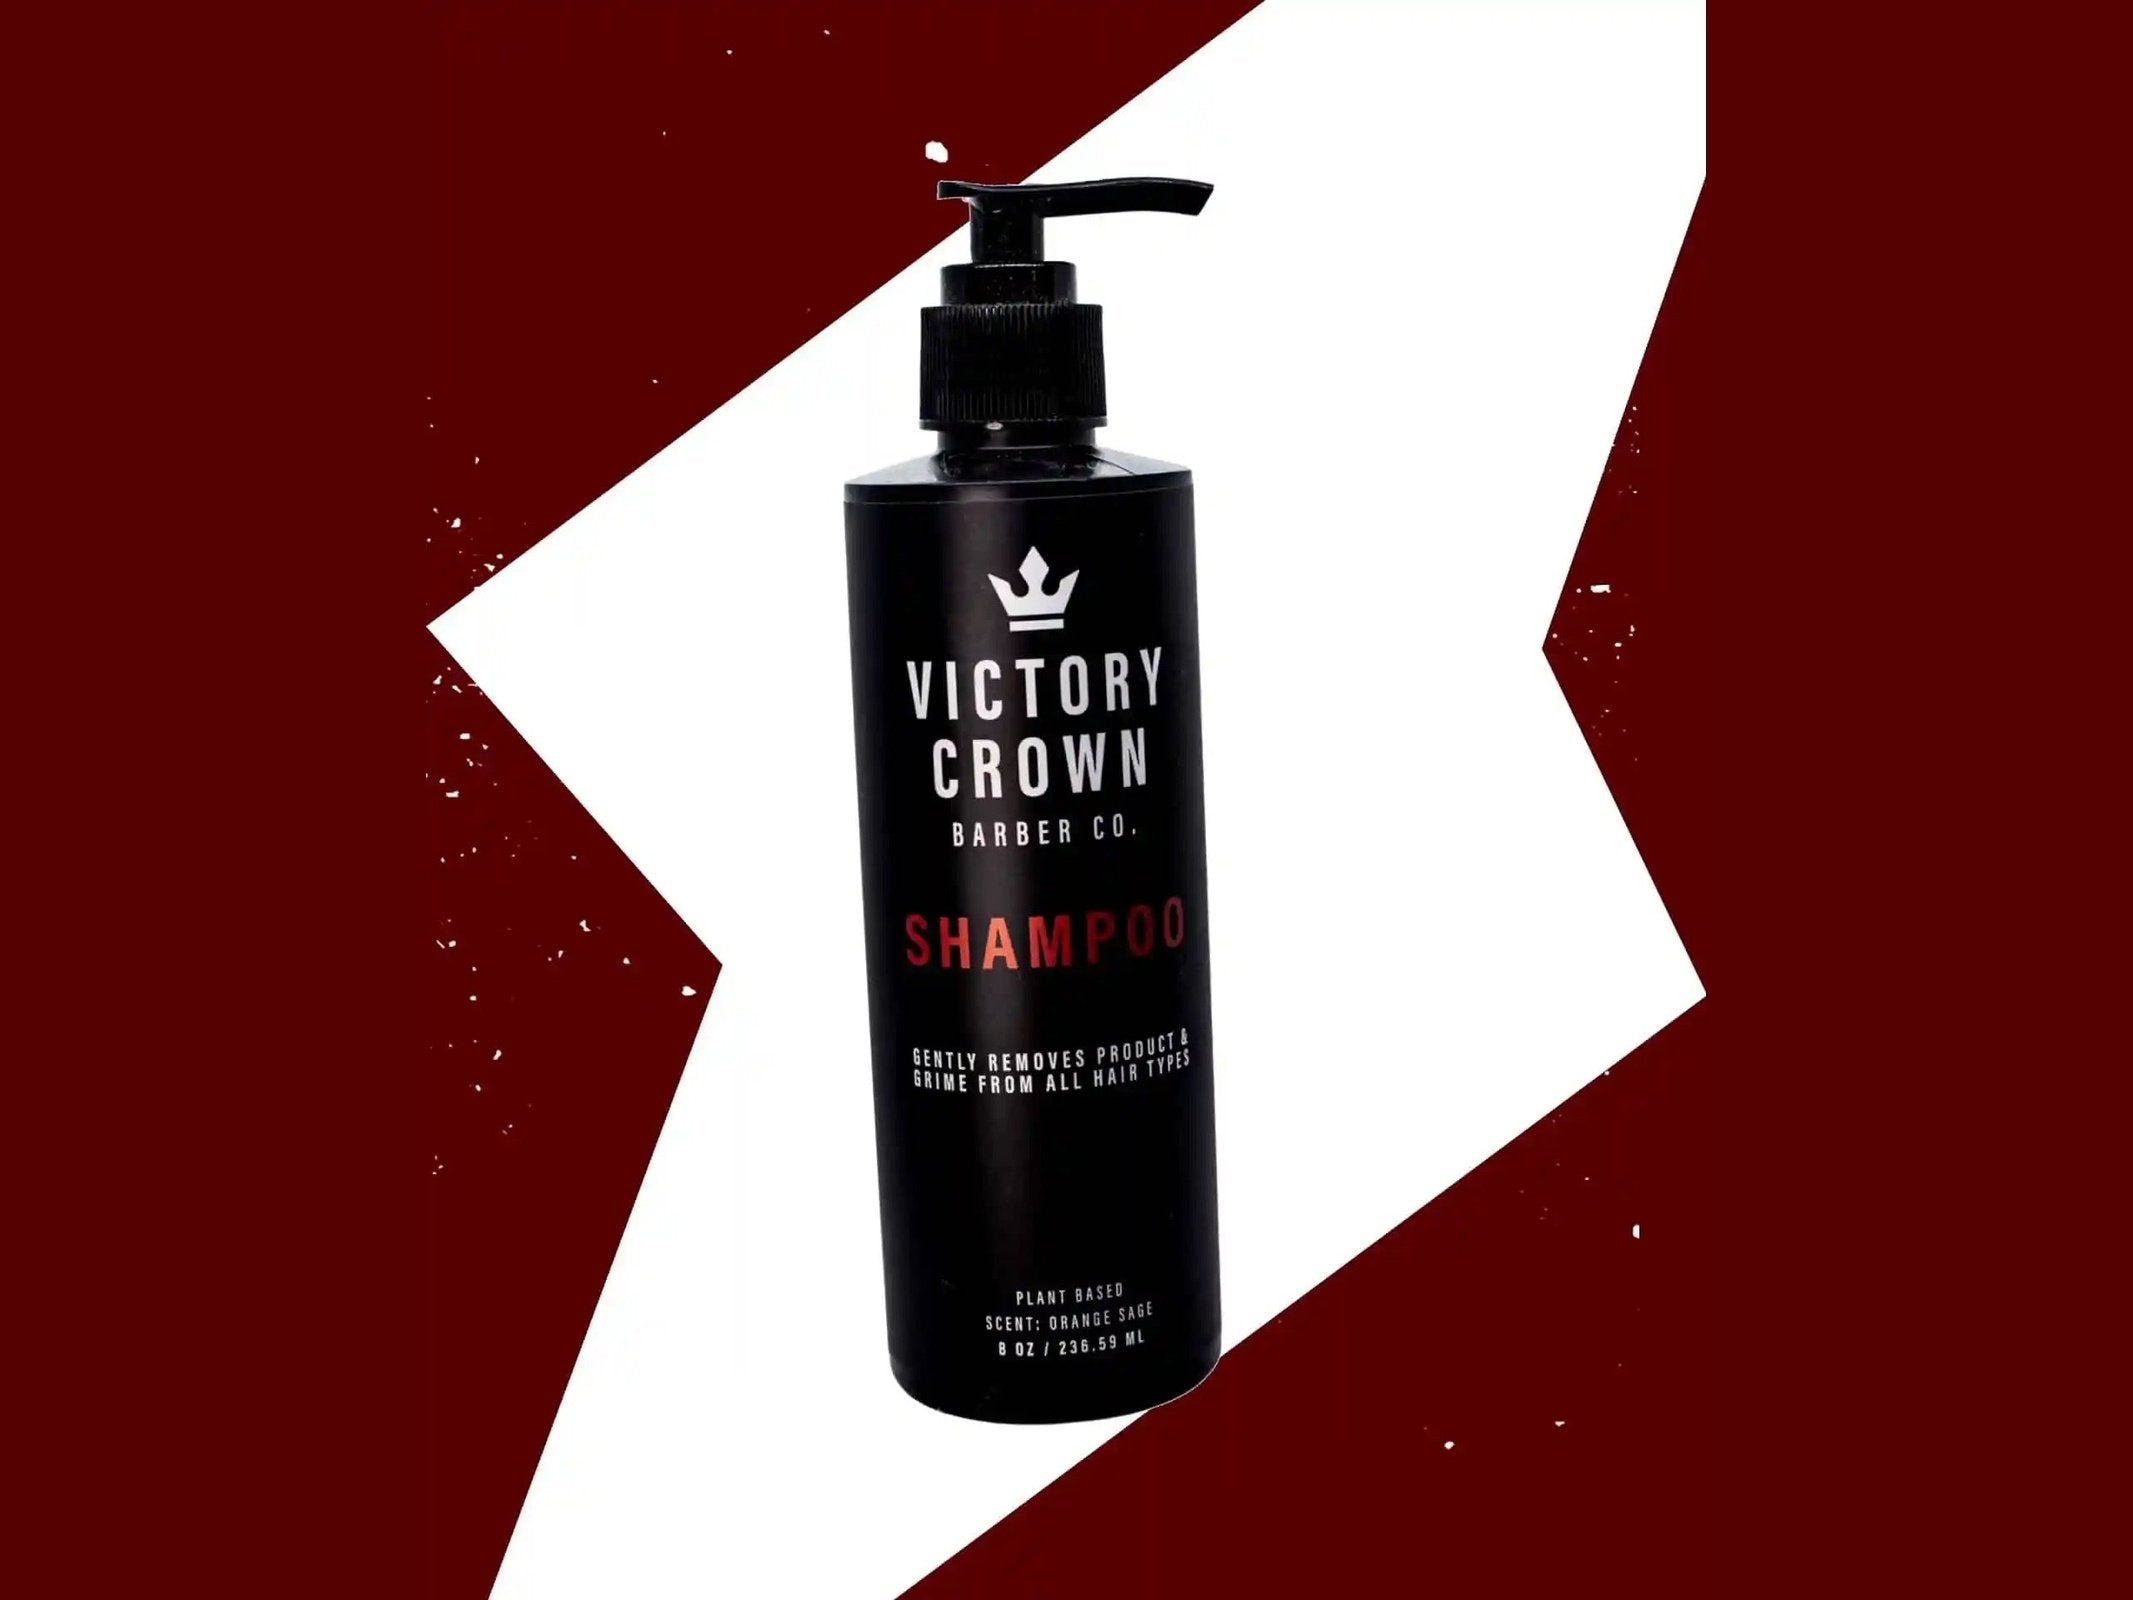 Load image into Gallery viewer, Victory Crown Shampoo, 8 oz.
